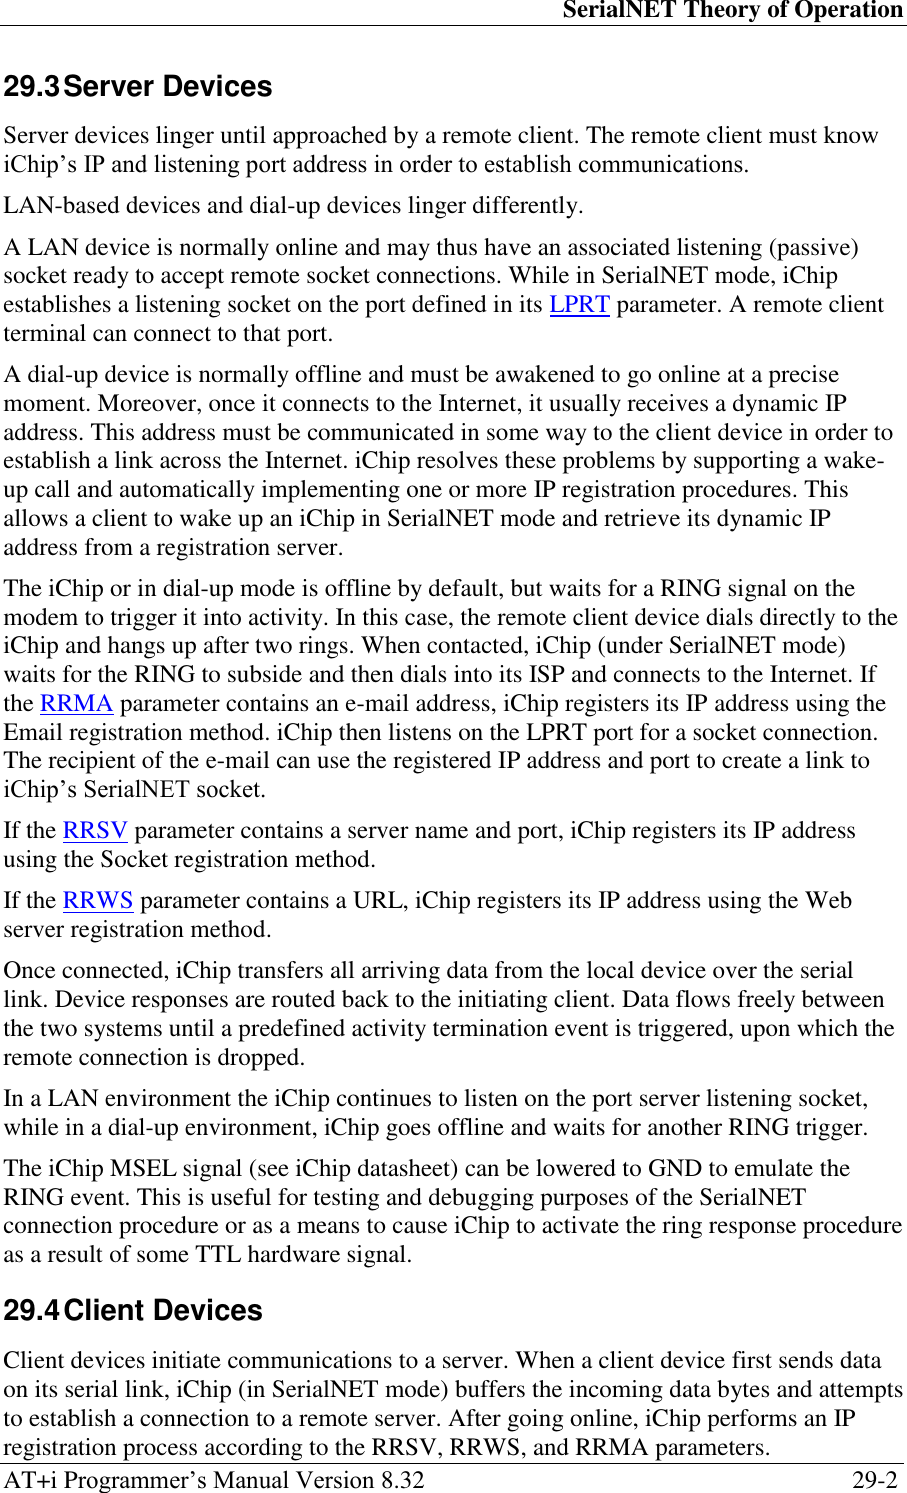 SerialNET Theory of Operation AT+i Programmer‘s Manual Version 8.32  29-2 29.3 Server Devices Server devices linger until approached by a remote client. The remote client must know iChip‘s IP and listening port address in order to establish communications. LAN-based devices and dial-up devices linger differently. A LAN device is normally online and may thus have an associated listening (passive) socket ready to accept remote socket connections. While in SerialNET mode, iChip establishes a listening socket on the port defined in its LPRT parameter. A remote client terminal can connect to that port. A dial-up device is normally offline and must be awakened to go online at a precise moment. Moreover, once it connects to the Internet, it usually receives a dynamic IP address. This address must be communicated in some way to the client device in order to establish a link across the Internet. iChip resolves these problems by supporting a wake-up call and automatically implementing one or more IP registration procedures. This allows a client to wake up an iChip in SerialNET mode and retrieve its dynamic IP address from a registration server. The iChip or in dial-up mode is offline by default, but waits for a RING signal on the modem to trigger it into activity. In this case, the remote client device dials directly to the iChip and hangs up after two rings. When contacted, iChip (under SerialNET mode) waits for the RING to subside and then dials into its ISP and connects to the Internet. If the RRMA parameter contains an e-mail address, iChip registers its IP address using the Email registration method. iChip then listens on the LPRT port for a socket connection. The recipient of the e-mail can use the registered IP address and port to create a link to iChip‘s SerialNET socket. If the RRSV parameter contains a server name and port, iChip registers its IP address using the Socket registration method. If the RRWS parameter contains a URL, iChip registers its IP address using the Web server registration method. Once connected, iChip transfers all arriving data from the local device over the serial link. Device responses are routed back to the initiating client. Data flows freely between the two systems until a predefined activity termination event is triggered, upon which the remote connection is dropped. In a LAN environment the iChip continues to listen on the port server listening socket, while in a dial-up environment, iChip goes offline and waits for another RING trigger. The iChip MSEL signal (see iChip datasheet) can be lowered to GND to emulate the RING event. This is useful for testing and debugging purposes of the SerialNET connection procedure or as a means to cause iChip to activate the ring response procedure as a result of some TTL hardware signal. 29.4 Client Devices Client devices initiate communications to a server. When a client device first sends data on its serial link, iChip (in SerialNET mode) buffers the incoming data bytes and attempts to establish a connection to a remote server. After going online, iChip performs an IP registration process according to the RRSV, RRWS, and RRMA parameters. 